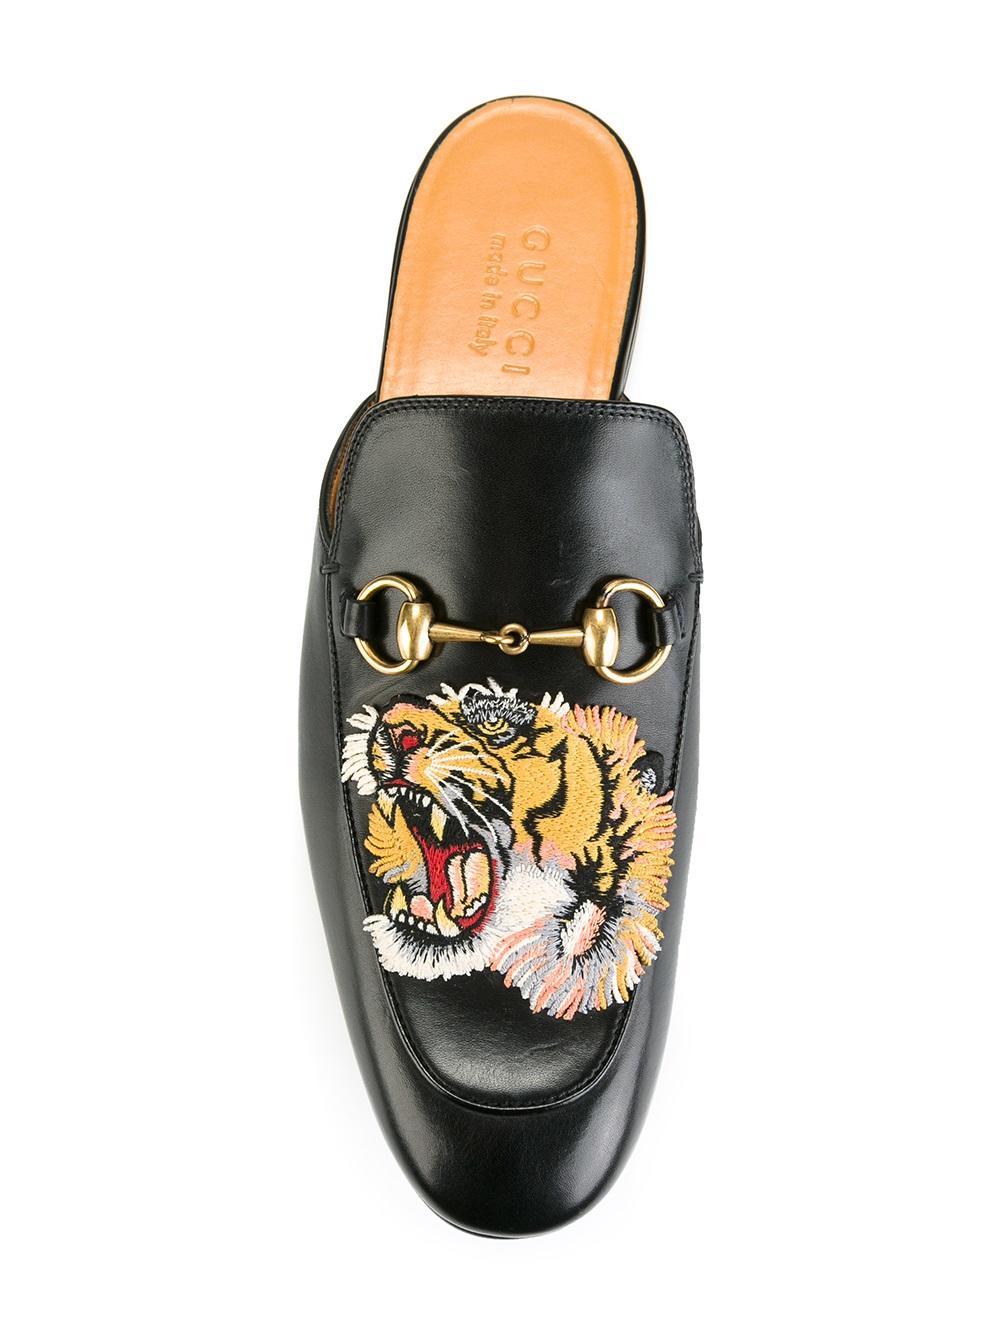 Kings Tiger Leather Mule in Black Leather (Black) for Men - Lyst